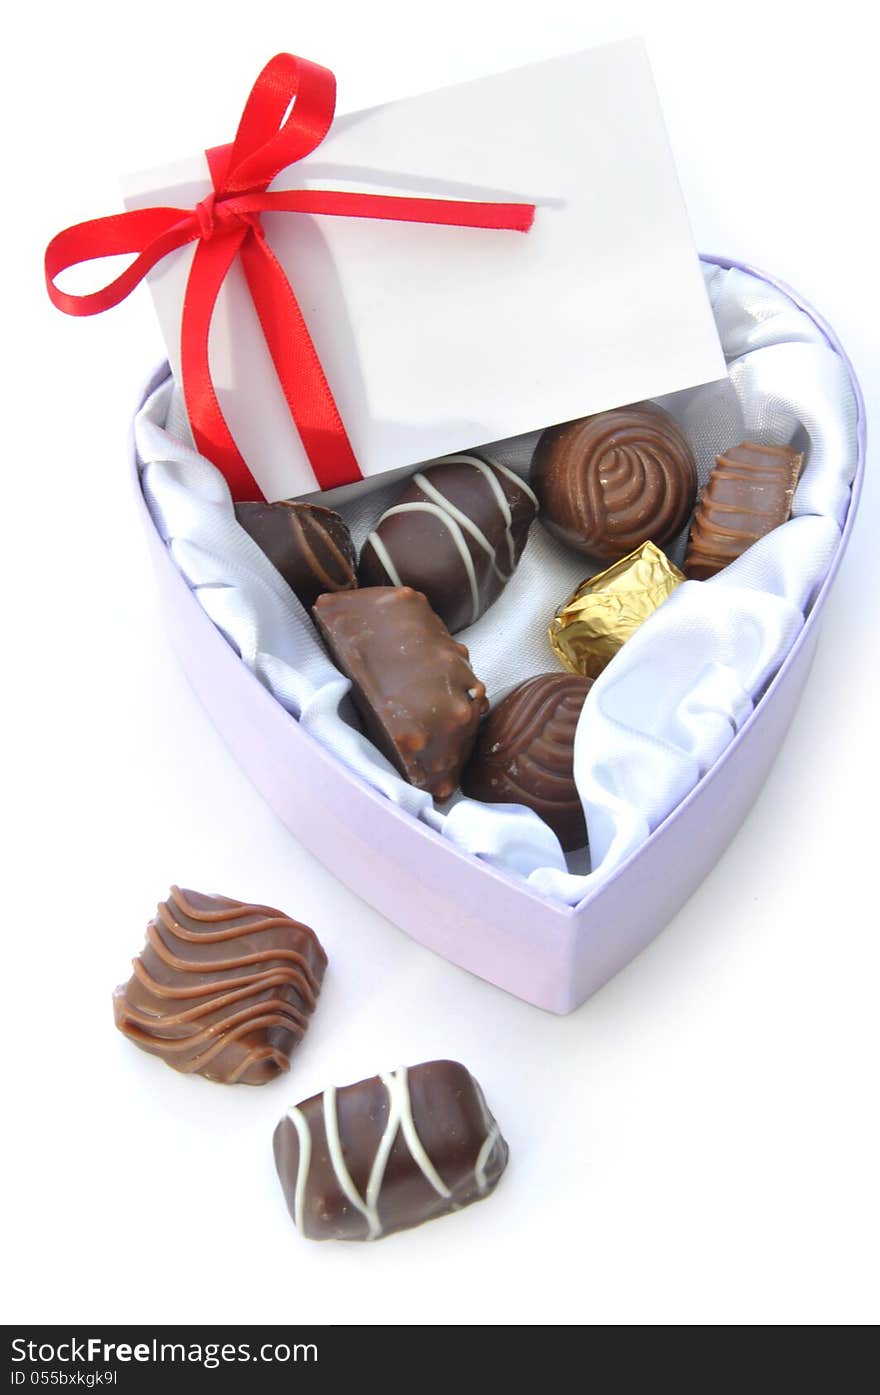 Assortment of chocolates inside a heartshaped box with a card and decorative red ribbon. Assortment of chocolates inside a heartshaped box with a card and decorative red ribbon